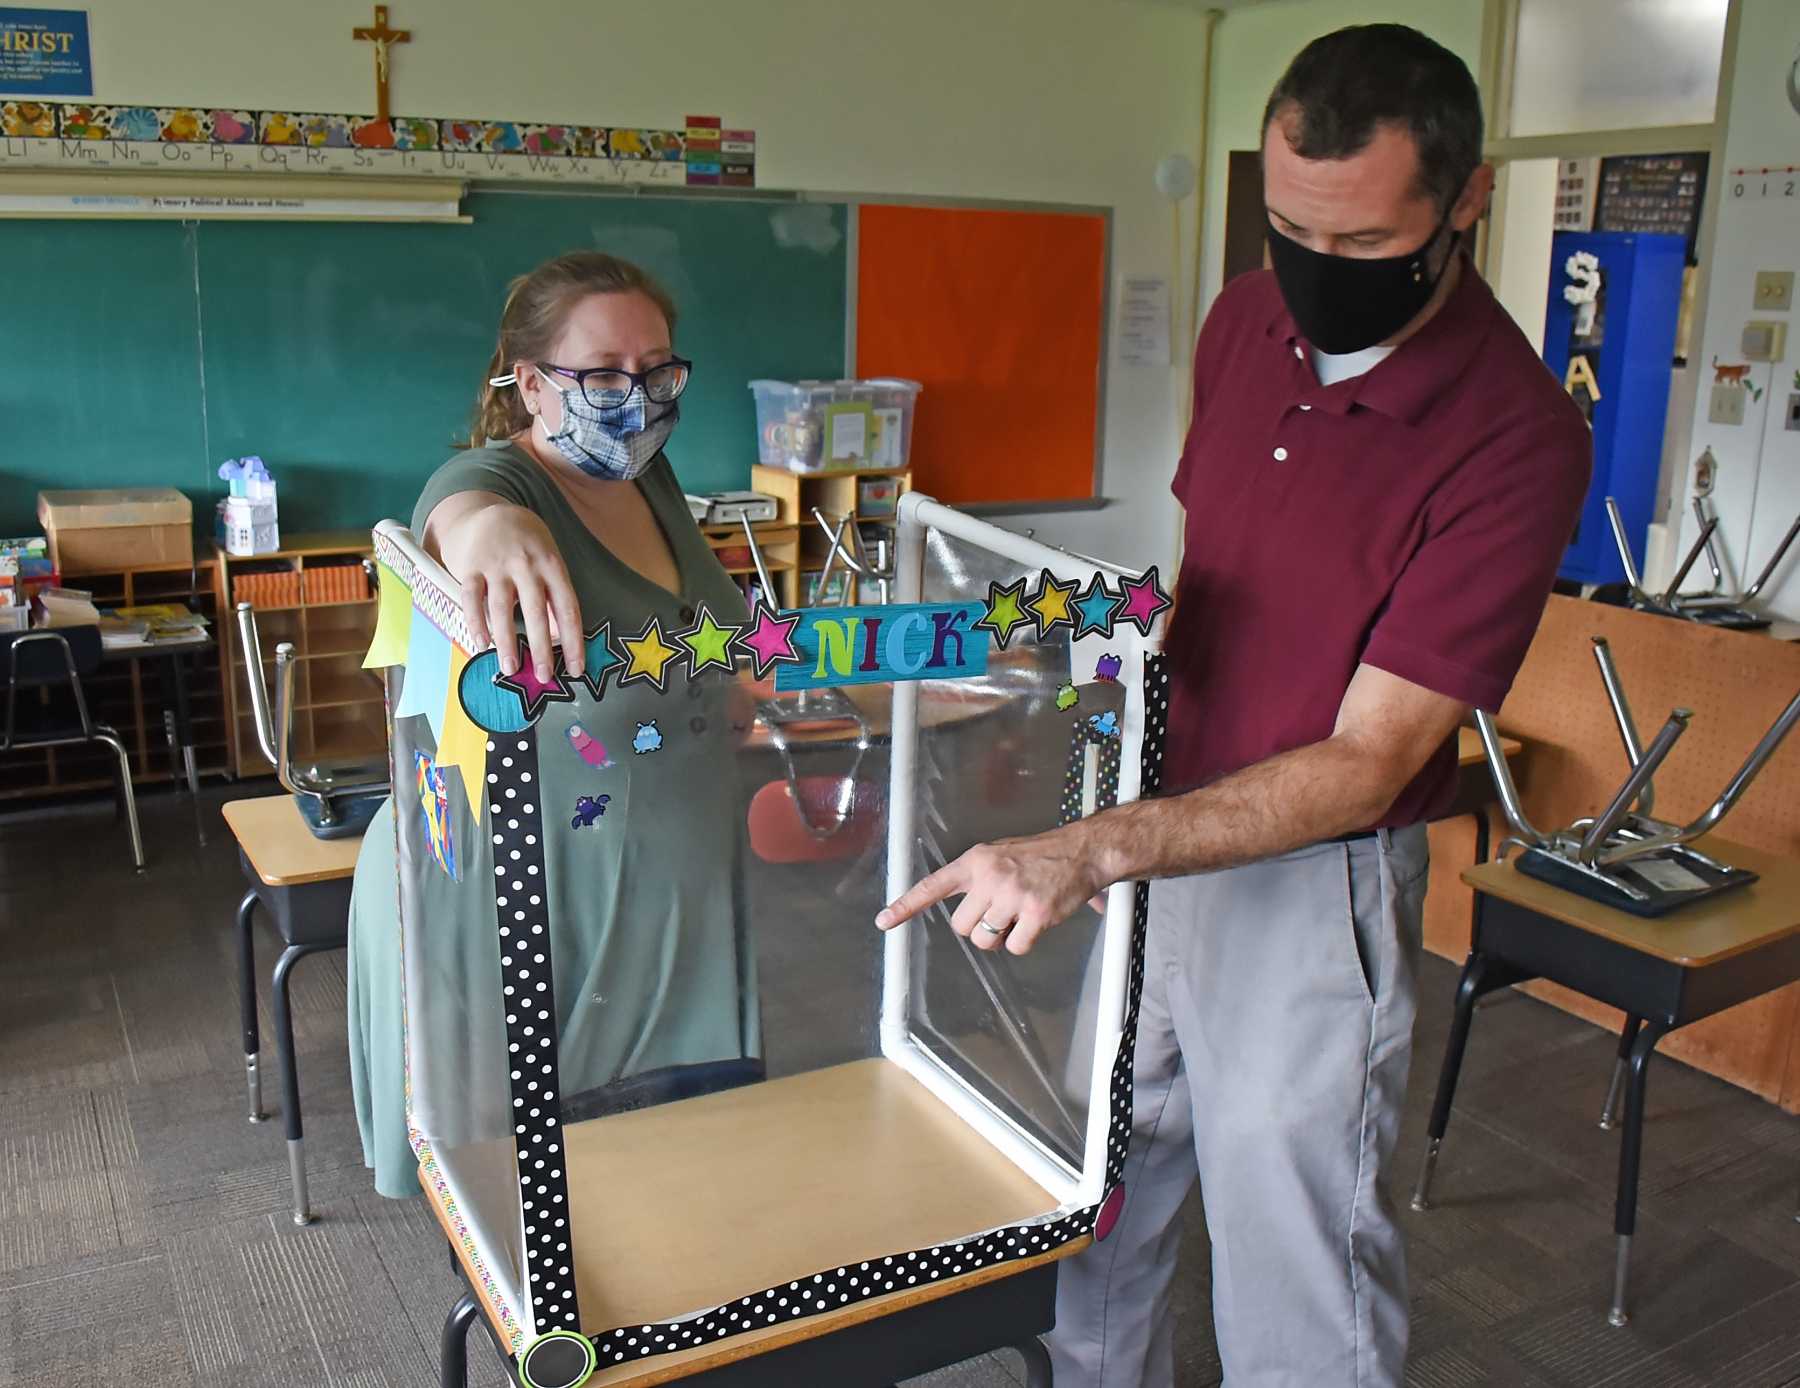 St. Amelia School principal Scott Kapperman and assistant principal Janet Larson look over a protective enclosure which will be provided for each student on their desk for the 2020 school year.